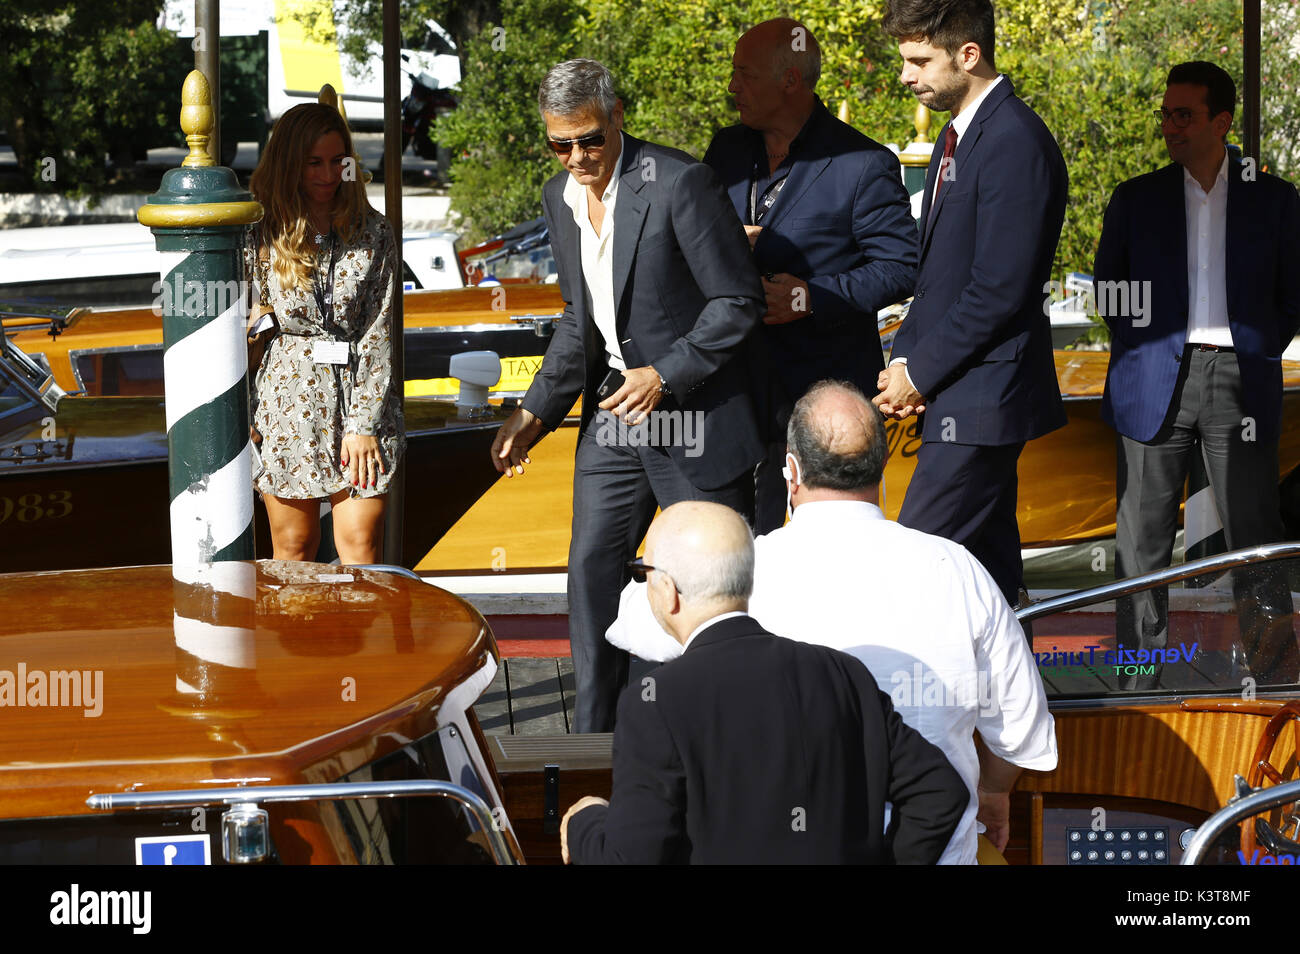 Venice, Italy. 01st Sep, 2017. George Clooney is seen leaving the Hotel Excelsior after giving interviews during the 74th Venice Film Festival on September 01, 2017 in Venice, Italy | usage worldwide Credit: dpa/Alamy Live News Stock Photo